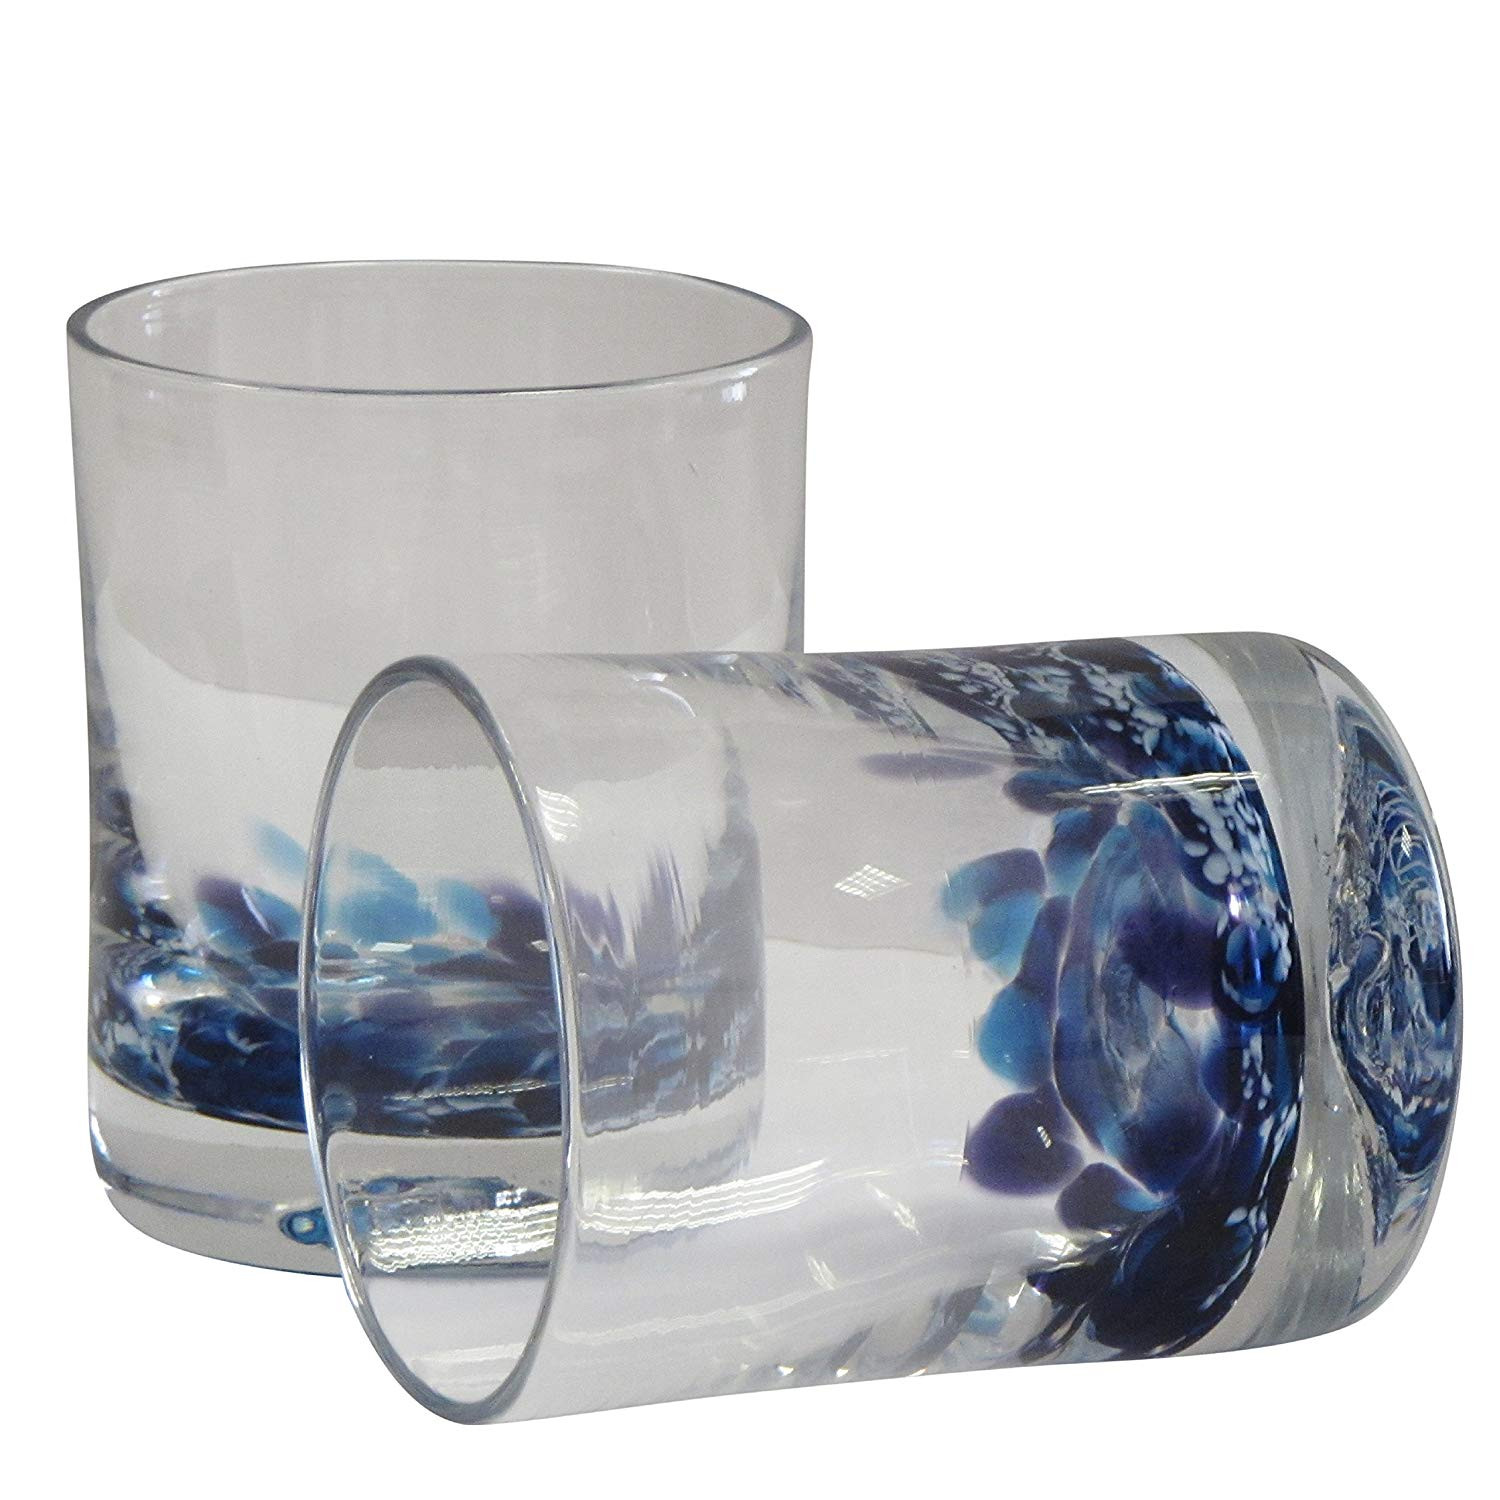 libbey 6 inch cylinder vase of amazon com irish handmade whiskey scotch glasses by jerpoint throughout amazon com irish handmade whiskey scotch glasses by jerpoint glass studios ireland set of two hand blown heavy base glass tumblers blue heather